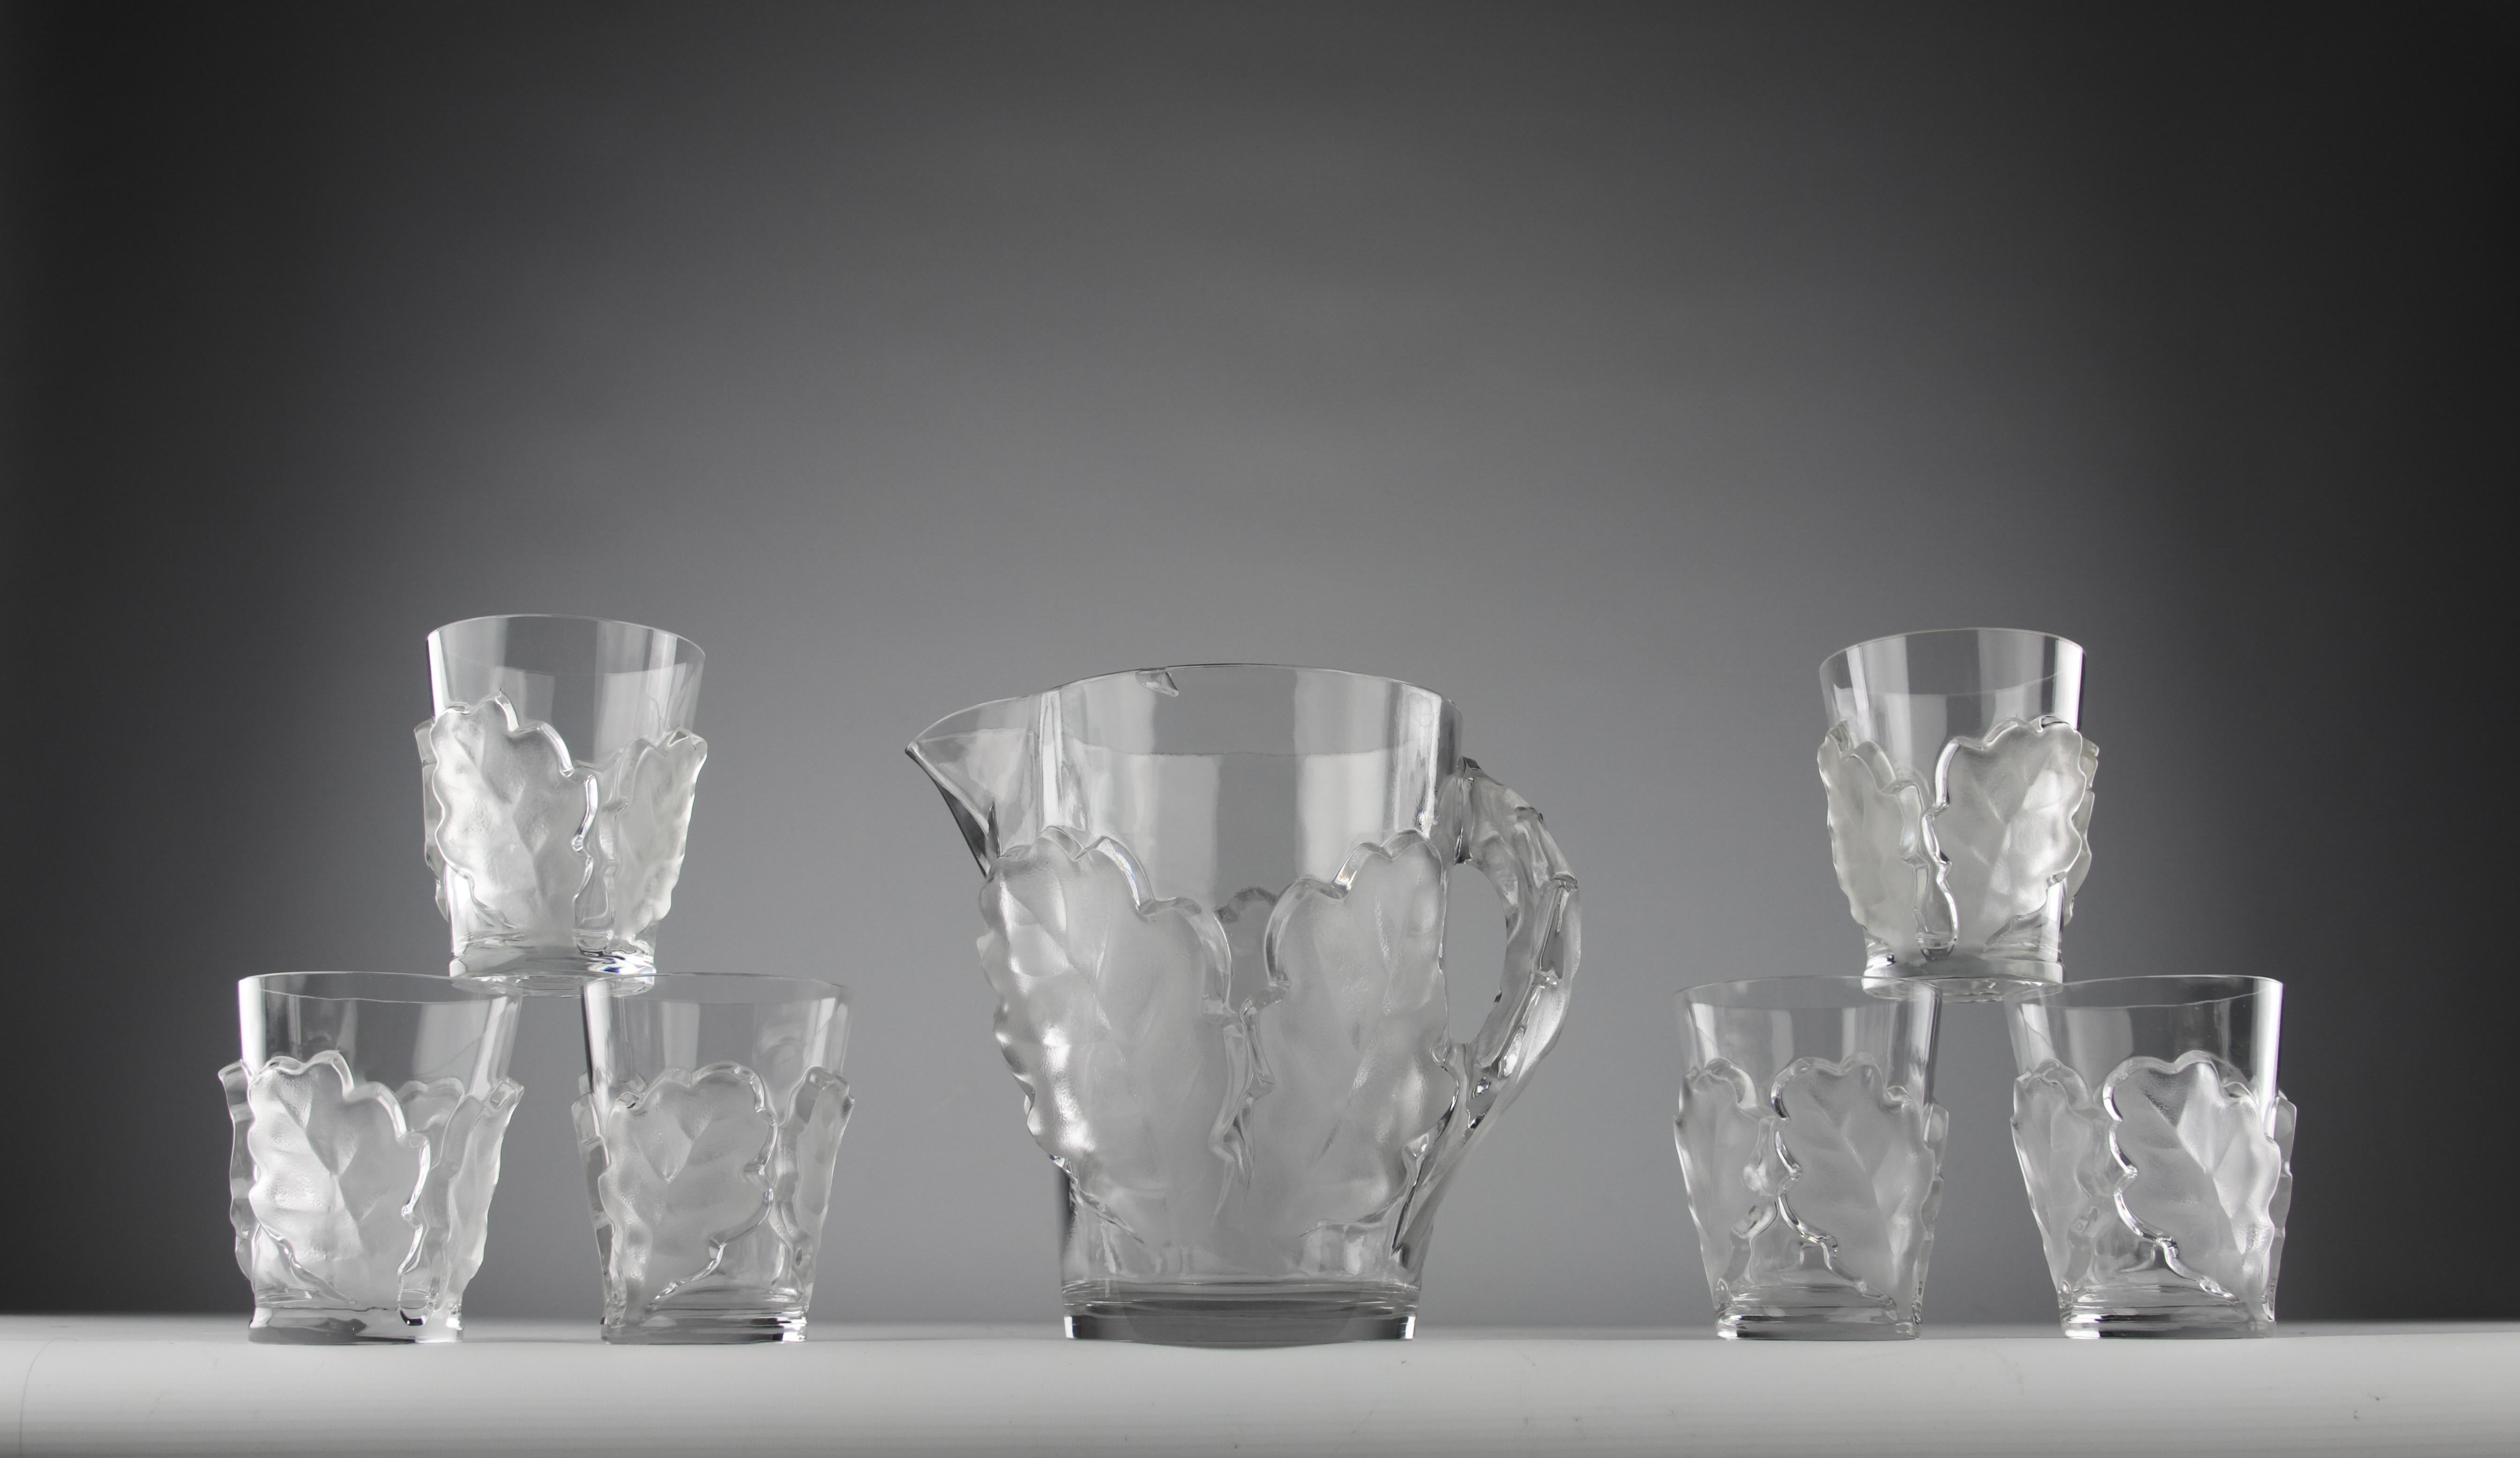 Beautiful oak leaf crystal service created by Marc Lalique for the Lalique Maison in 1950. 

In good condition. One chip to note on the rim of the carafe.

Dimensions in cm ( H x L x l ) and ( H x D ):
- Carafe 21.7 x 24 x 15.8
- Glass 11.8 x